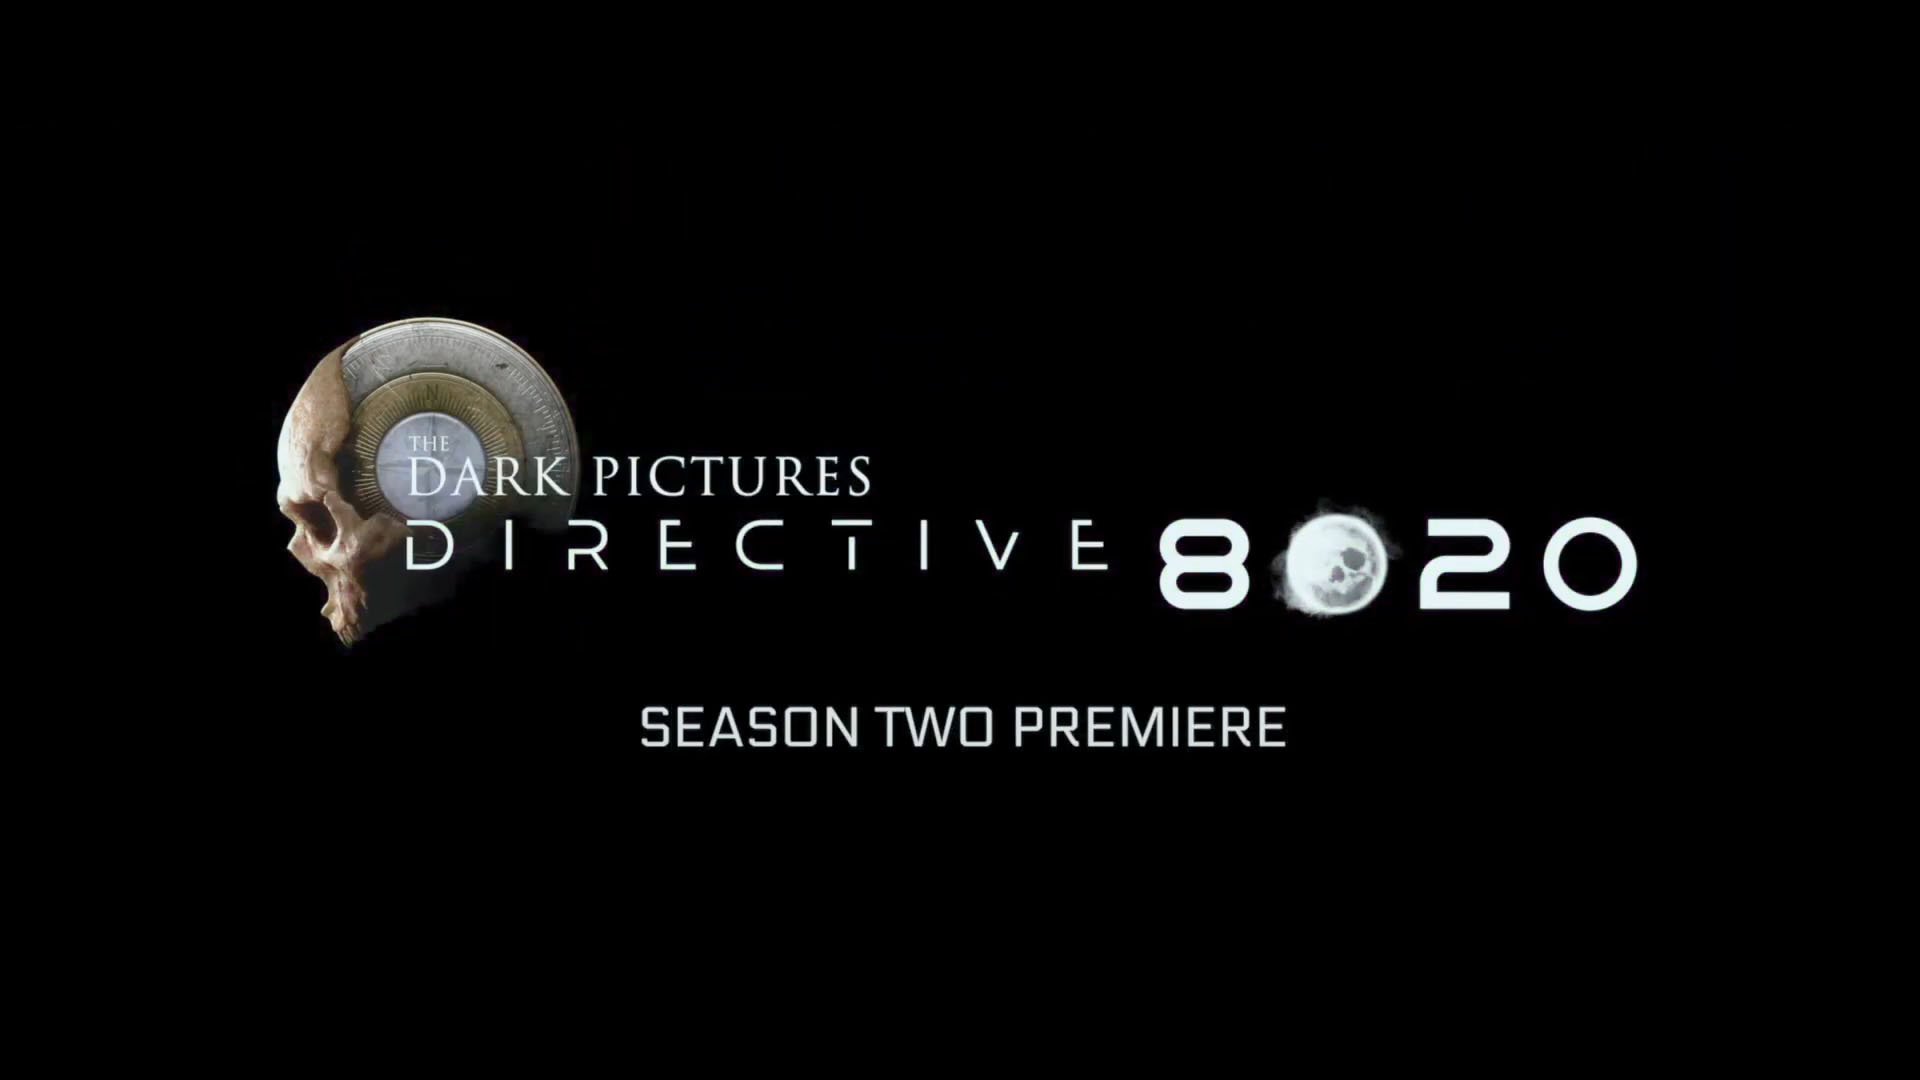 #
      The Dark Pictures Anthology: Directive 8020 announced